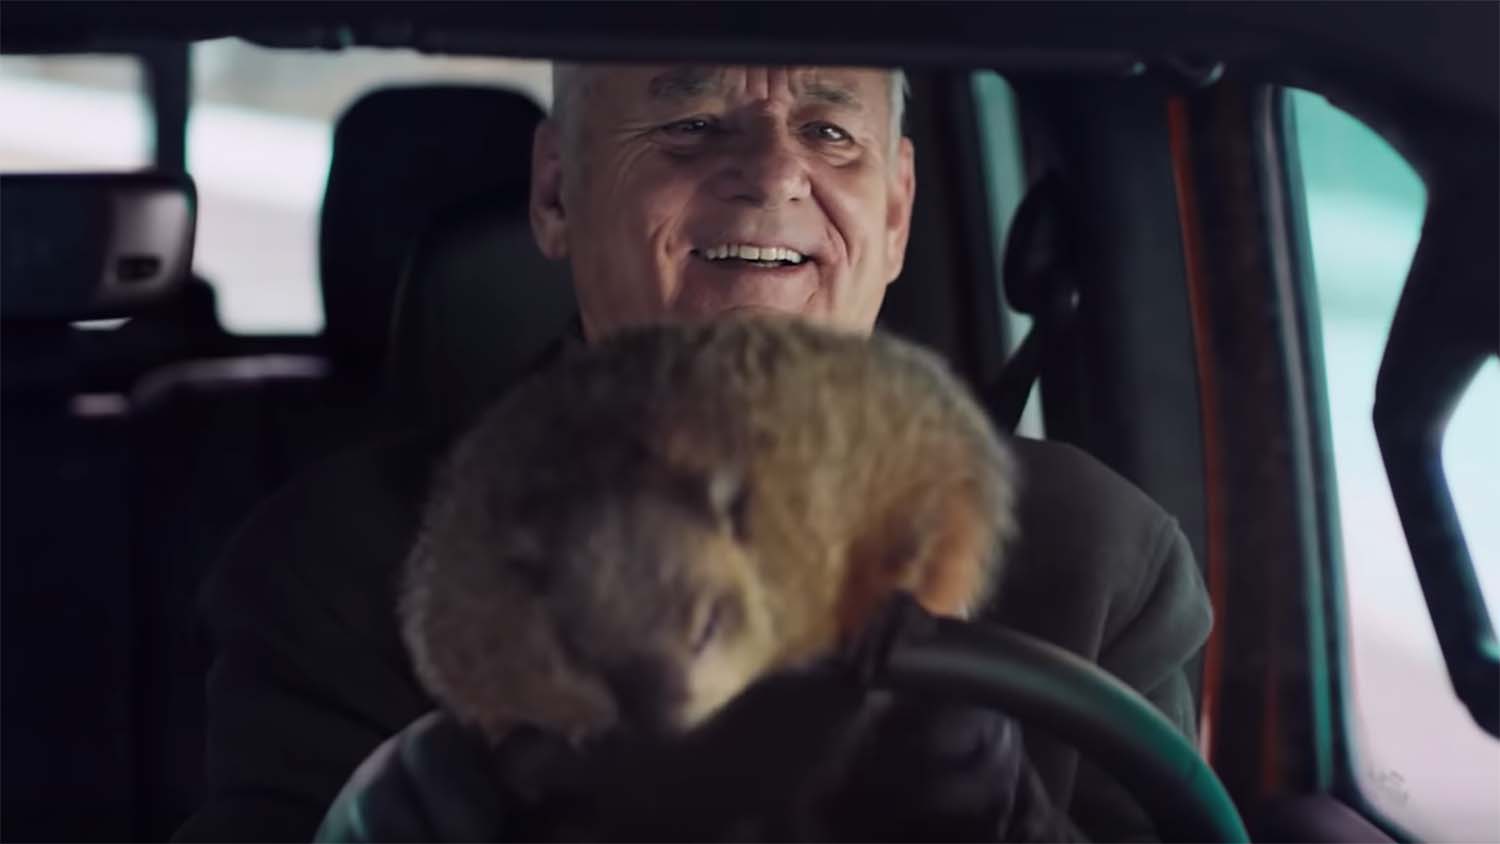 Bill Murray and the Groundhog in Jeep Super Bowl commercial